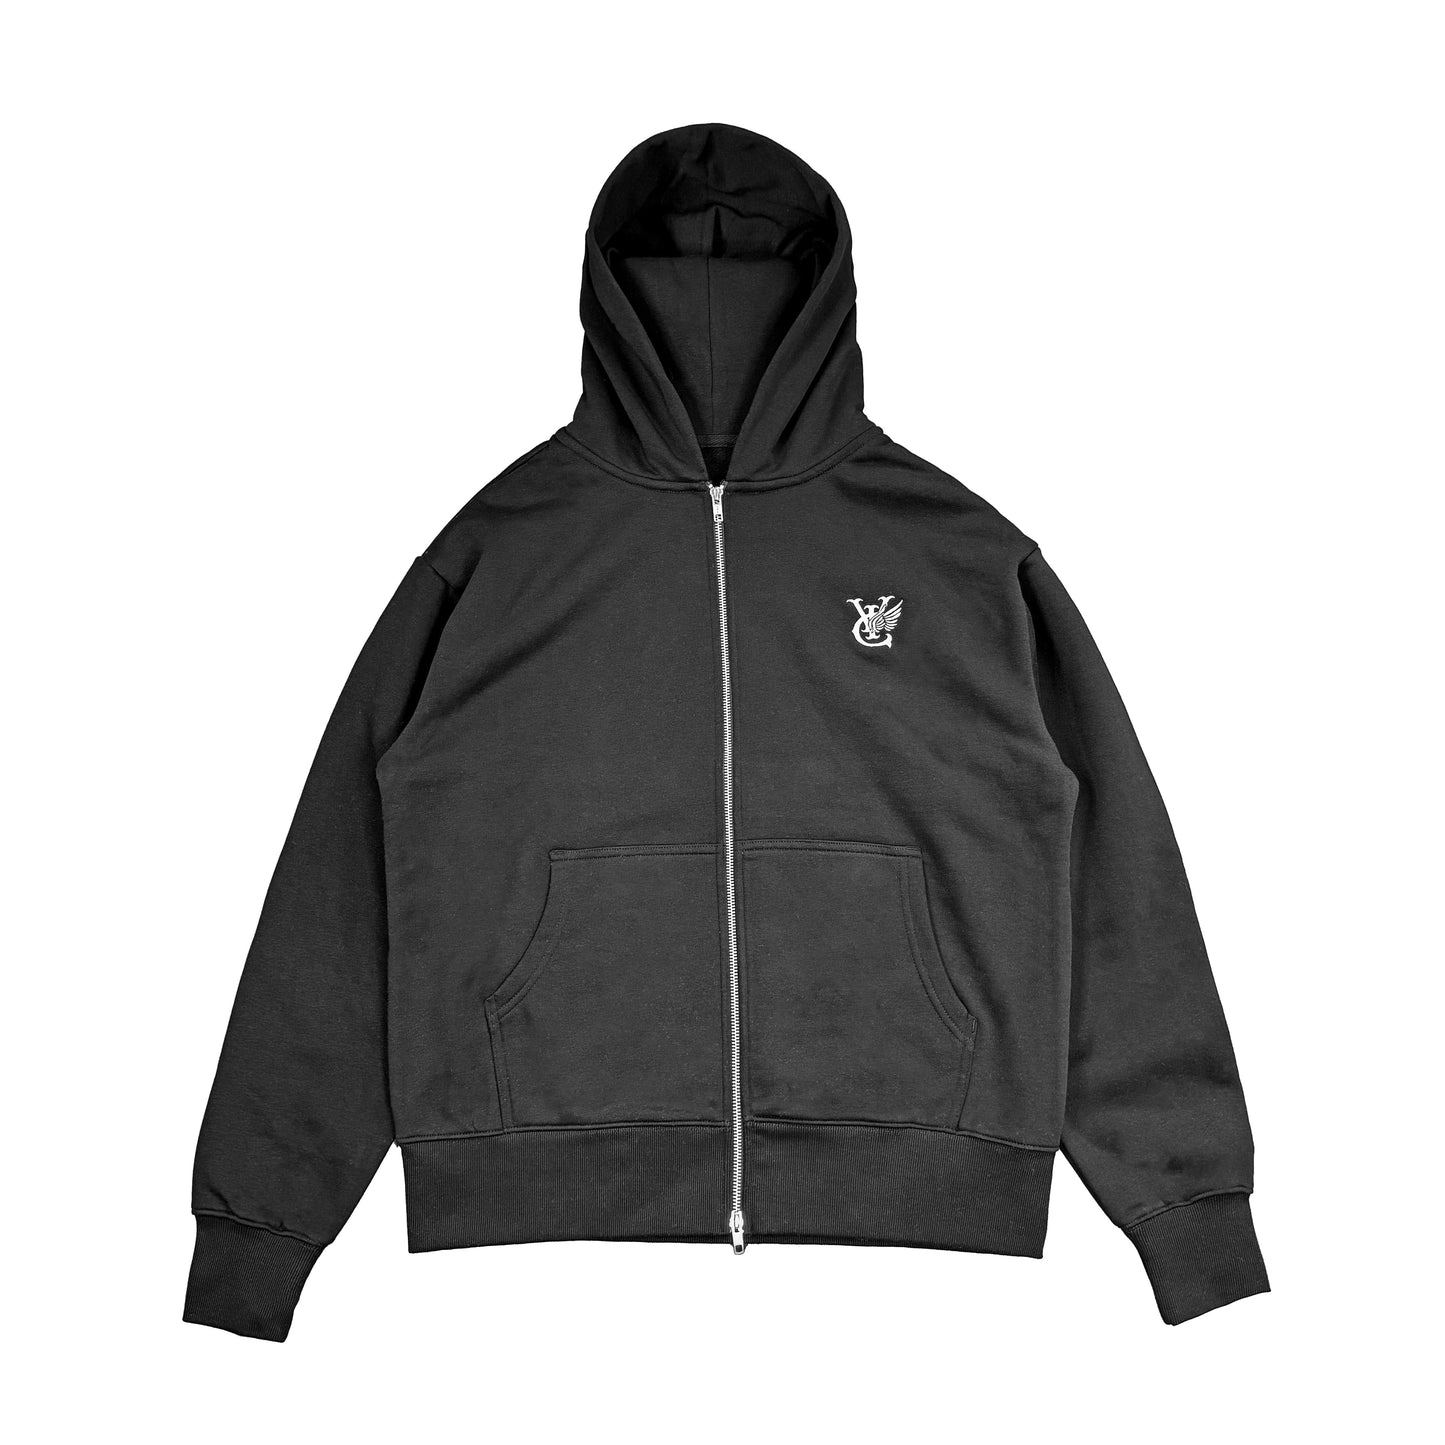 Introducing our WING ZIP HOOD (SUPER WEIGHT), the ultimate blend of style and comfort. This relaxed-fit hoodie boasts our heaviest fleece yet, a luxurious 400 GSM for unrivaled warmth. With a dropped shoulder design, 2-way YKK zipper, and subtle logo embroidery, it's the perfect choice for both chilly days and casual outings. Crafted from 80% cotton and 20% recycled polyester anti-pill fleece, it promises durability and softness in one.